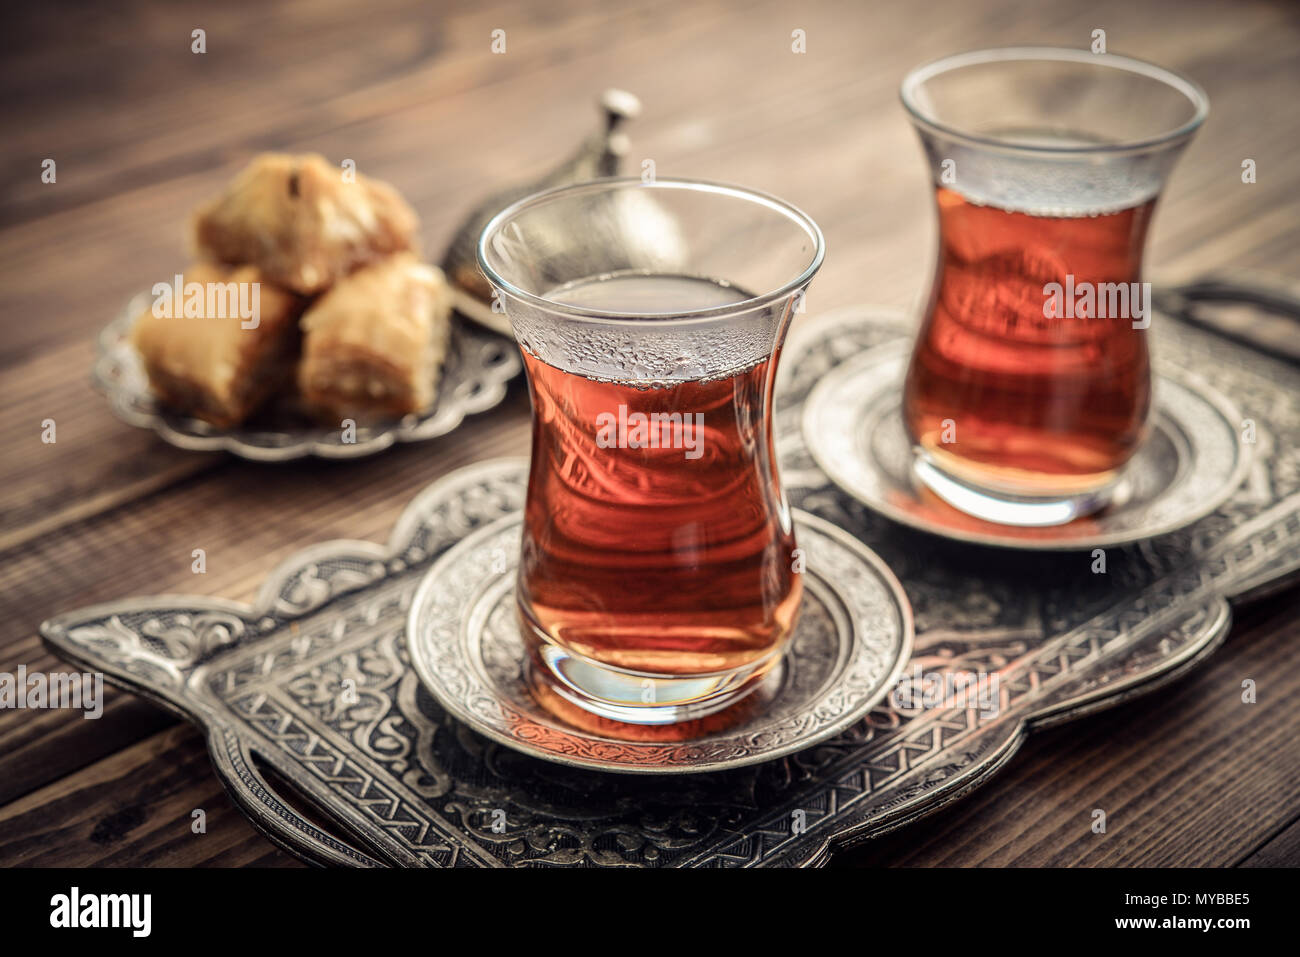 Cup of turkish tea served in traditional style with turkish delight on wooden background Stock Photo